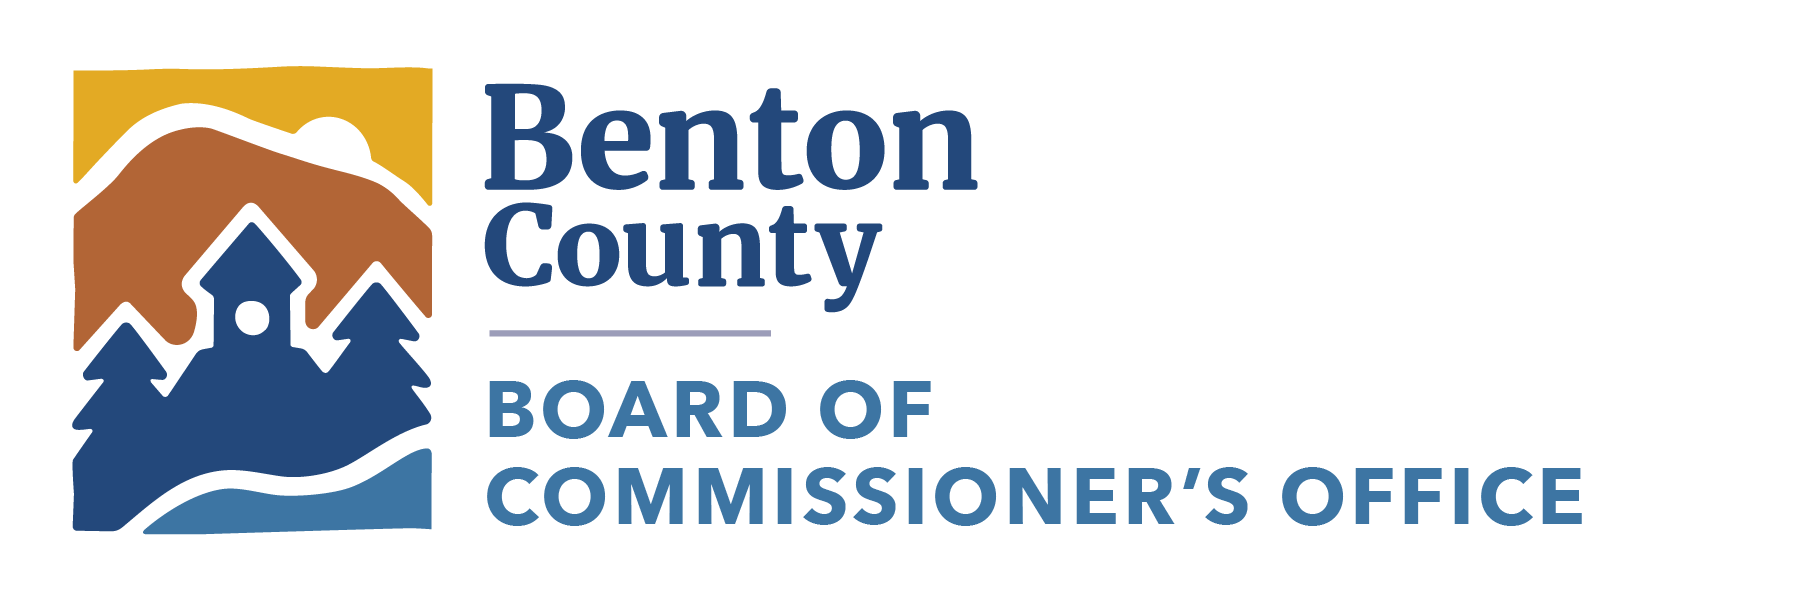 Benton County Board of Commissioners' logo